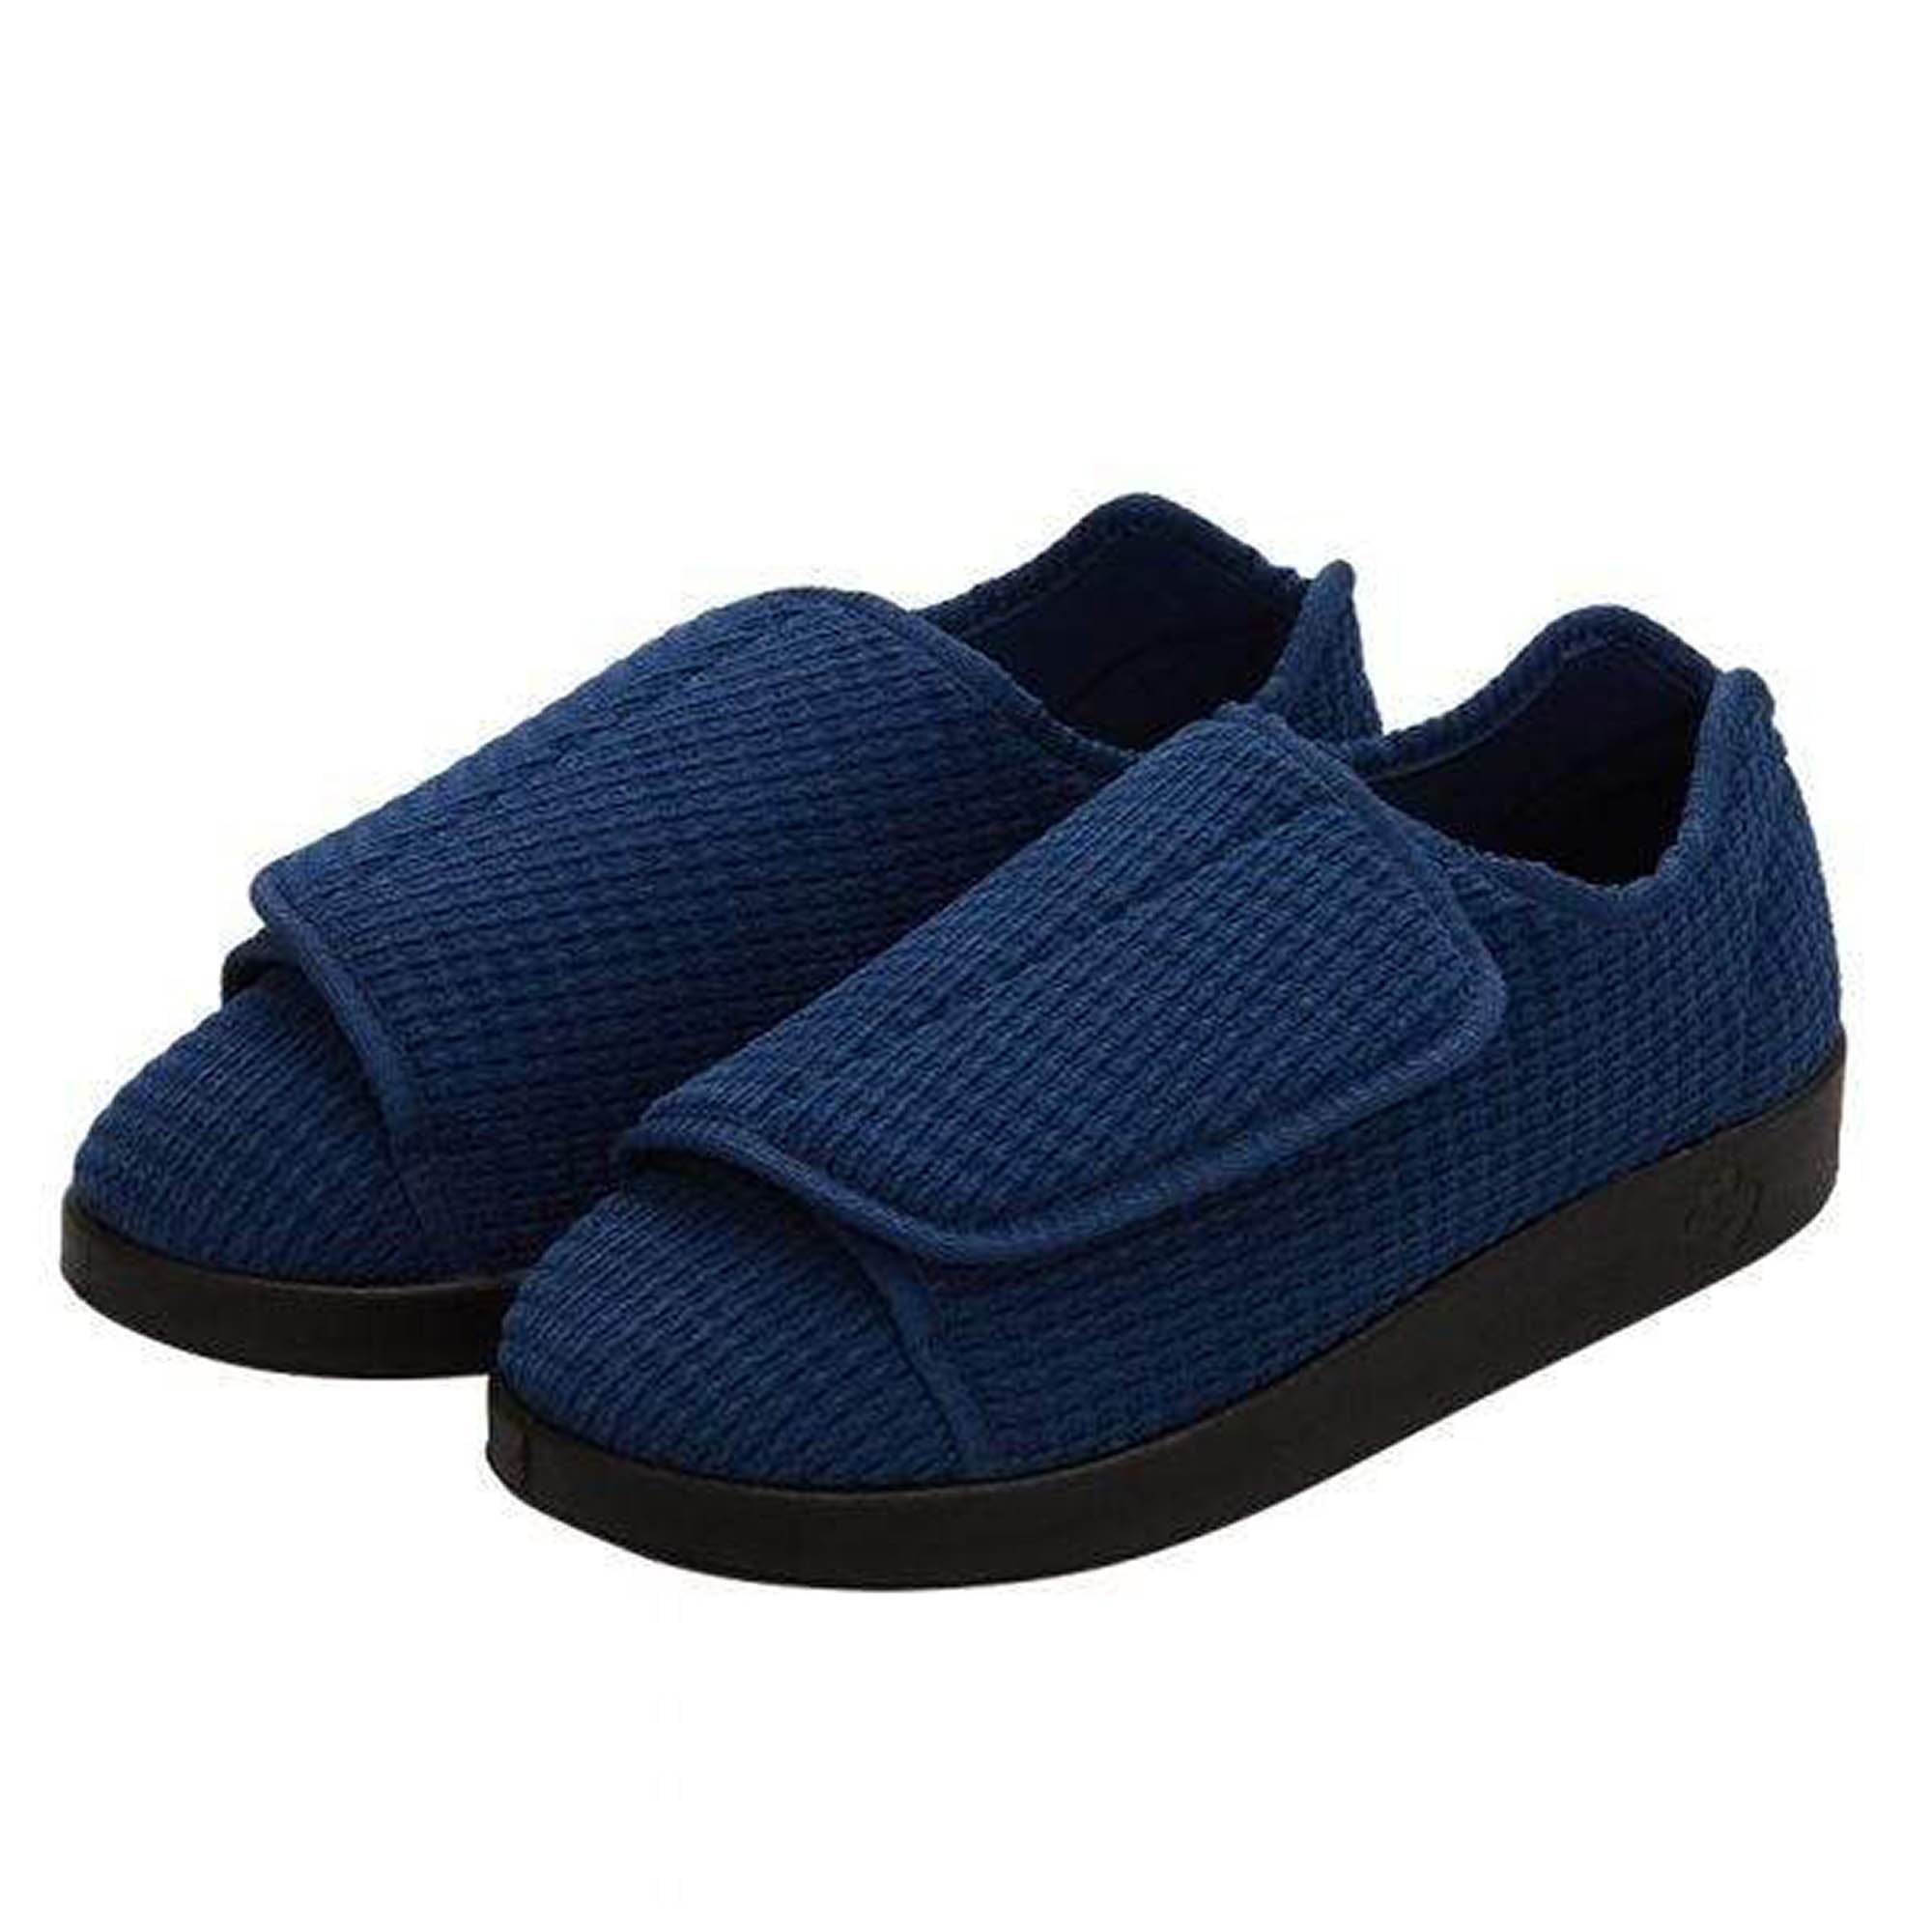 Silverts Men's Extra Extra Wide Slip-Resistant Slippers - Navy - 9